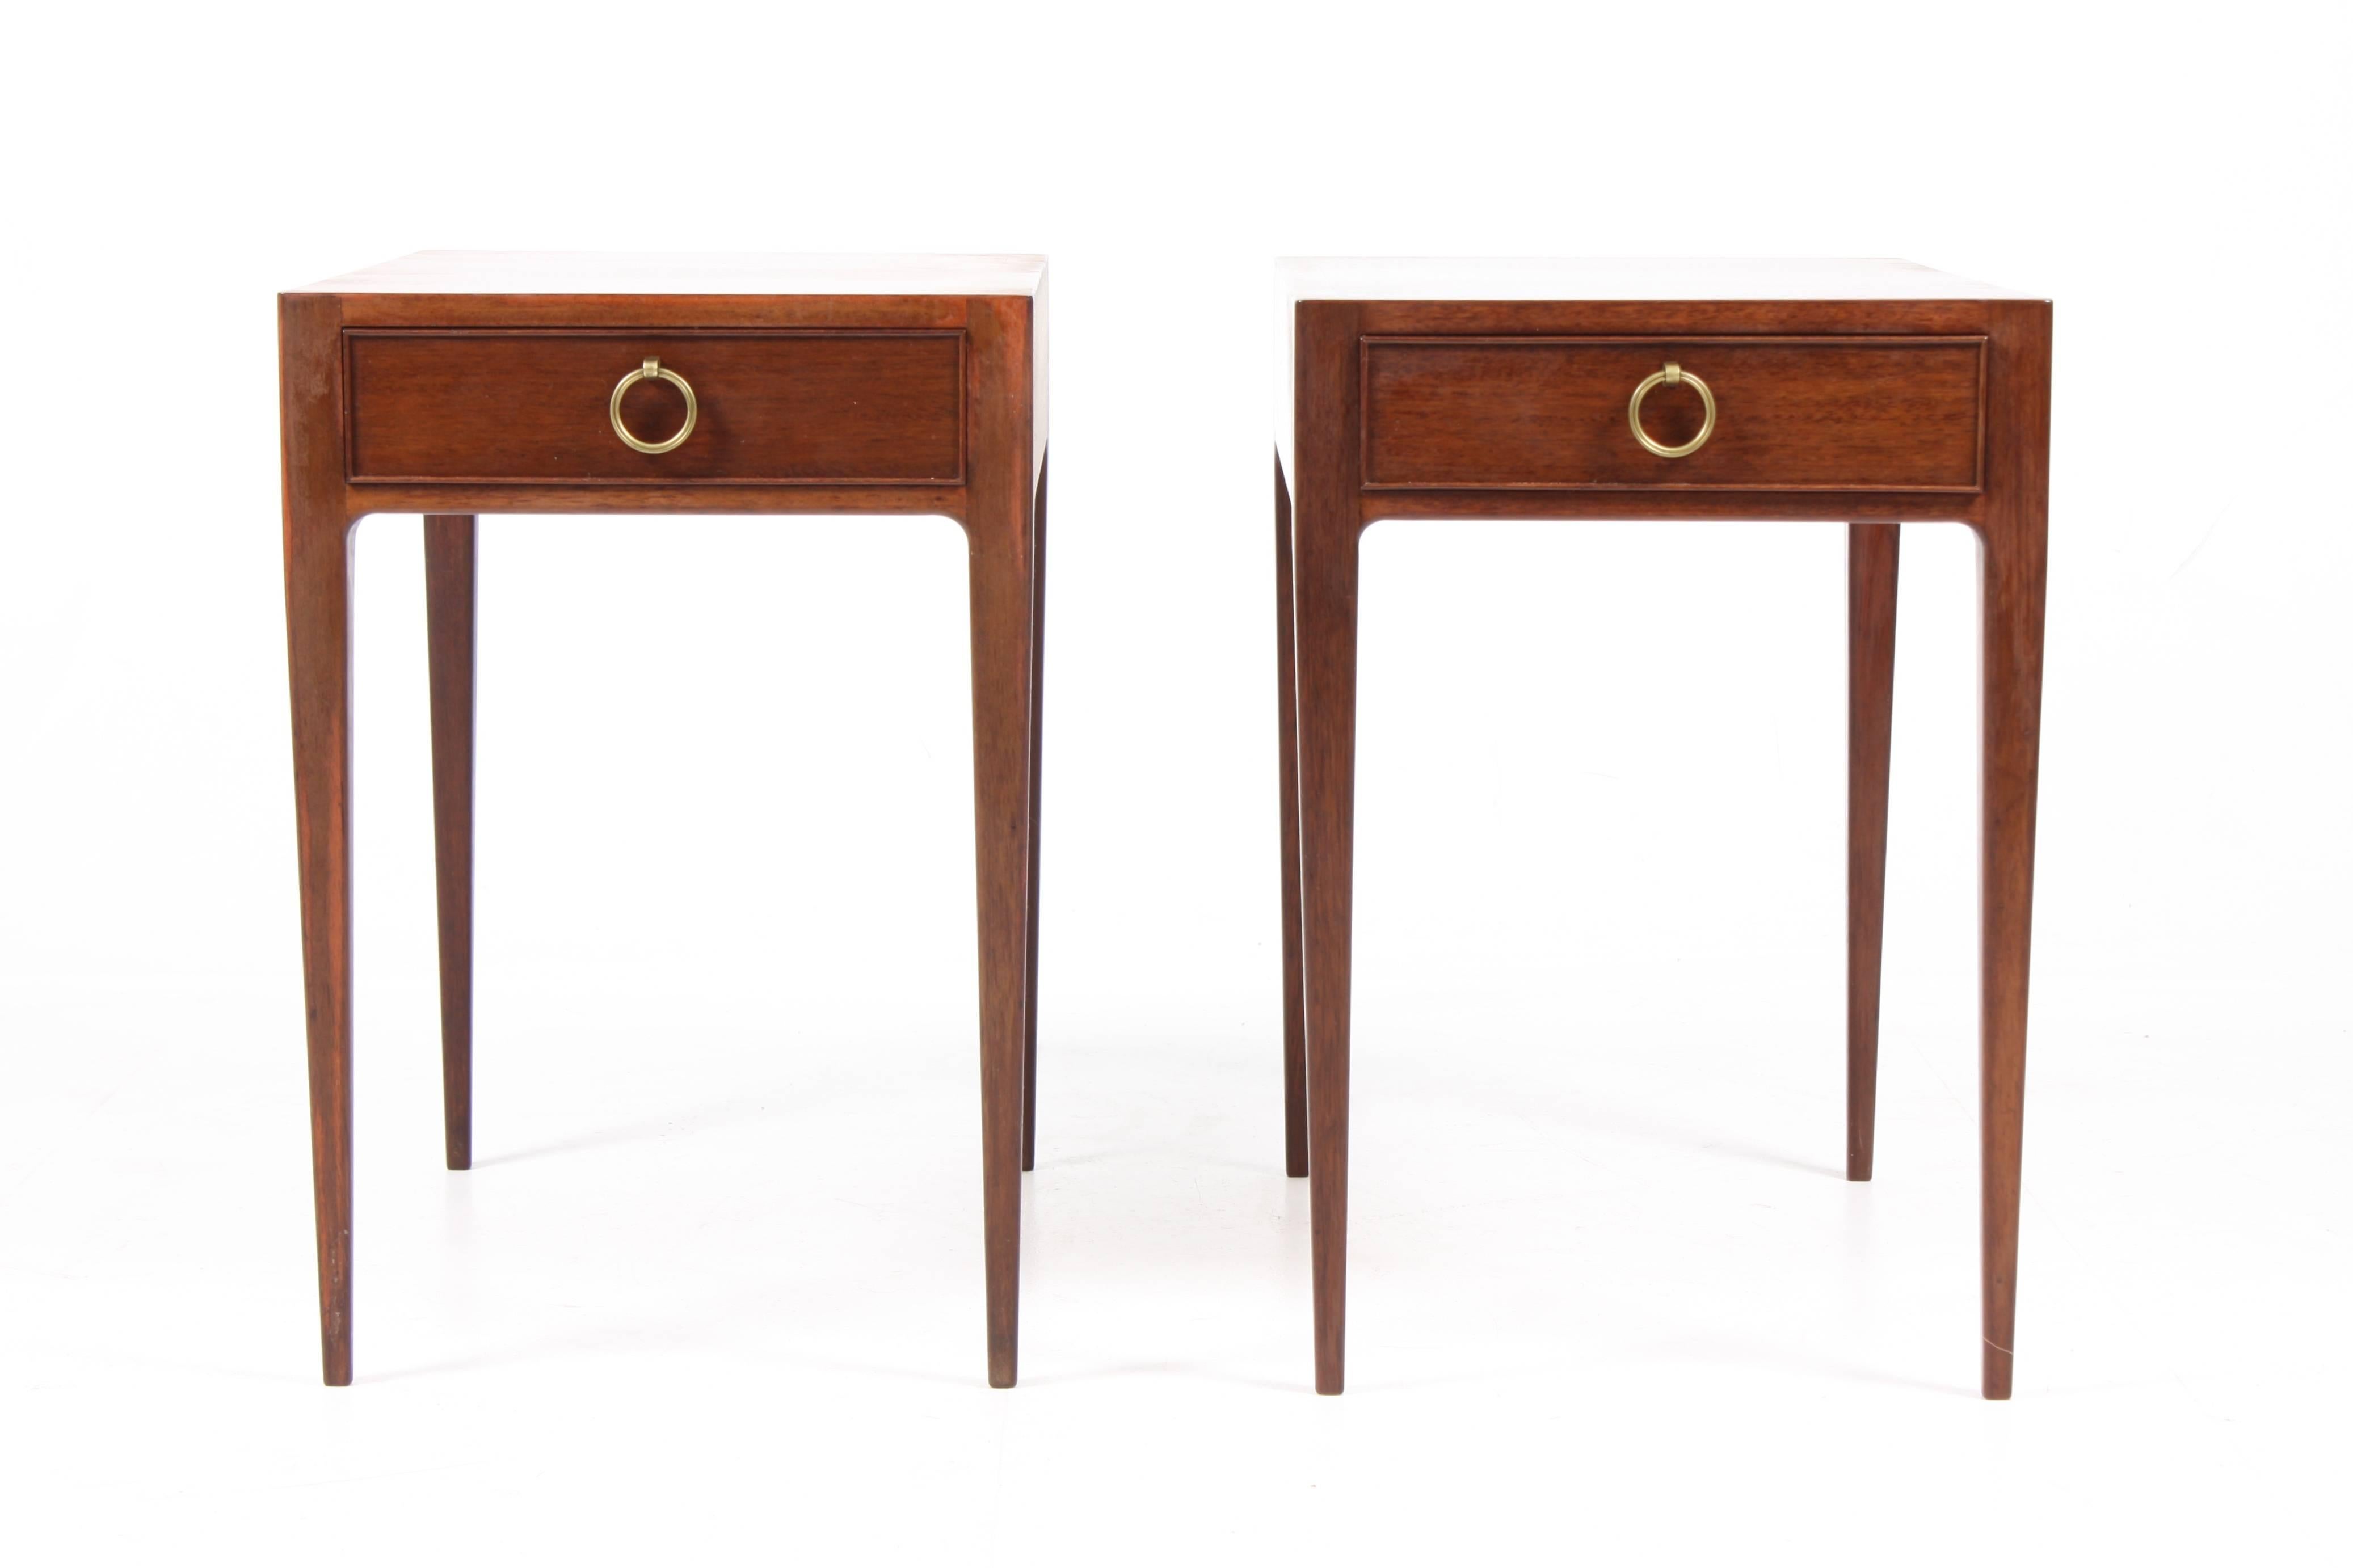 Pair of 1940s Scandinavian end tables designed by Danish Architect Ernst Kühn for Lysberg Hansen. Made of mahogany with hard ware in brass. The perfect choice for a sofa or as night stands. Great condition.